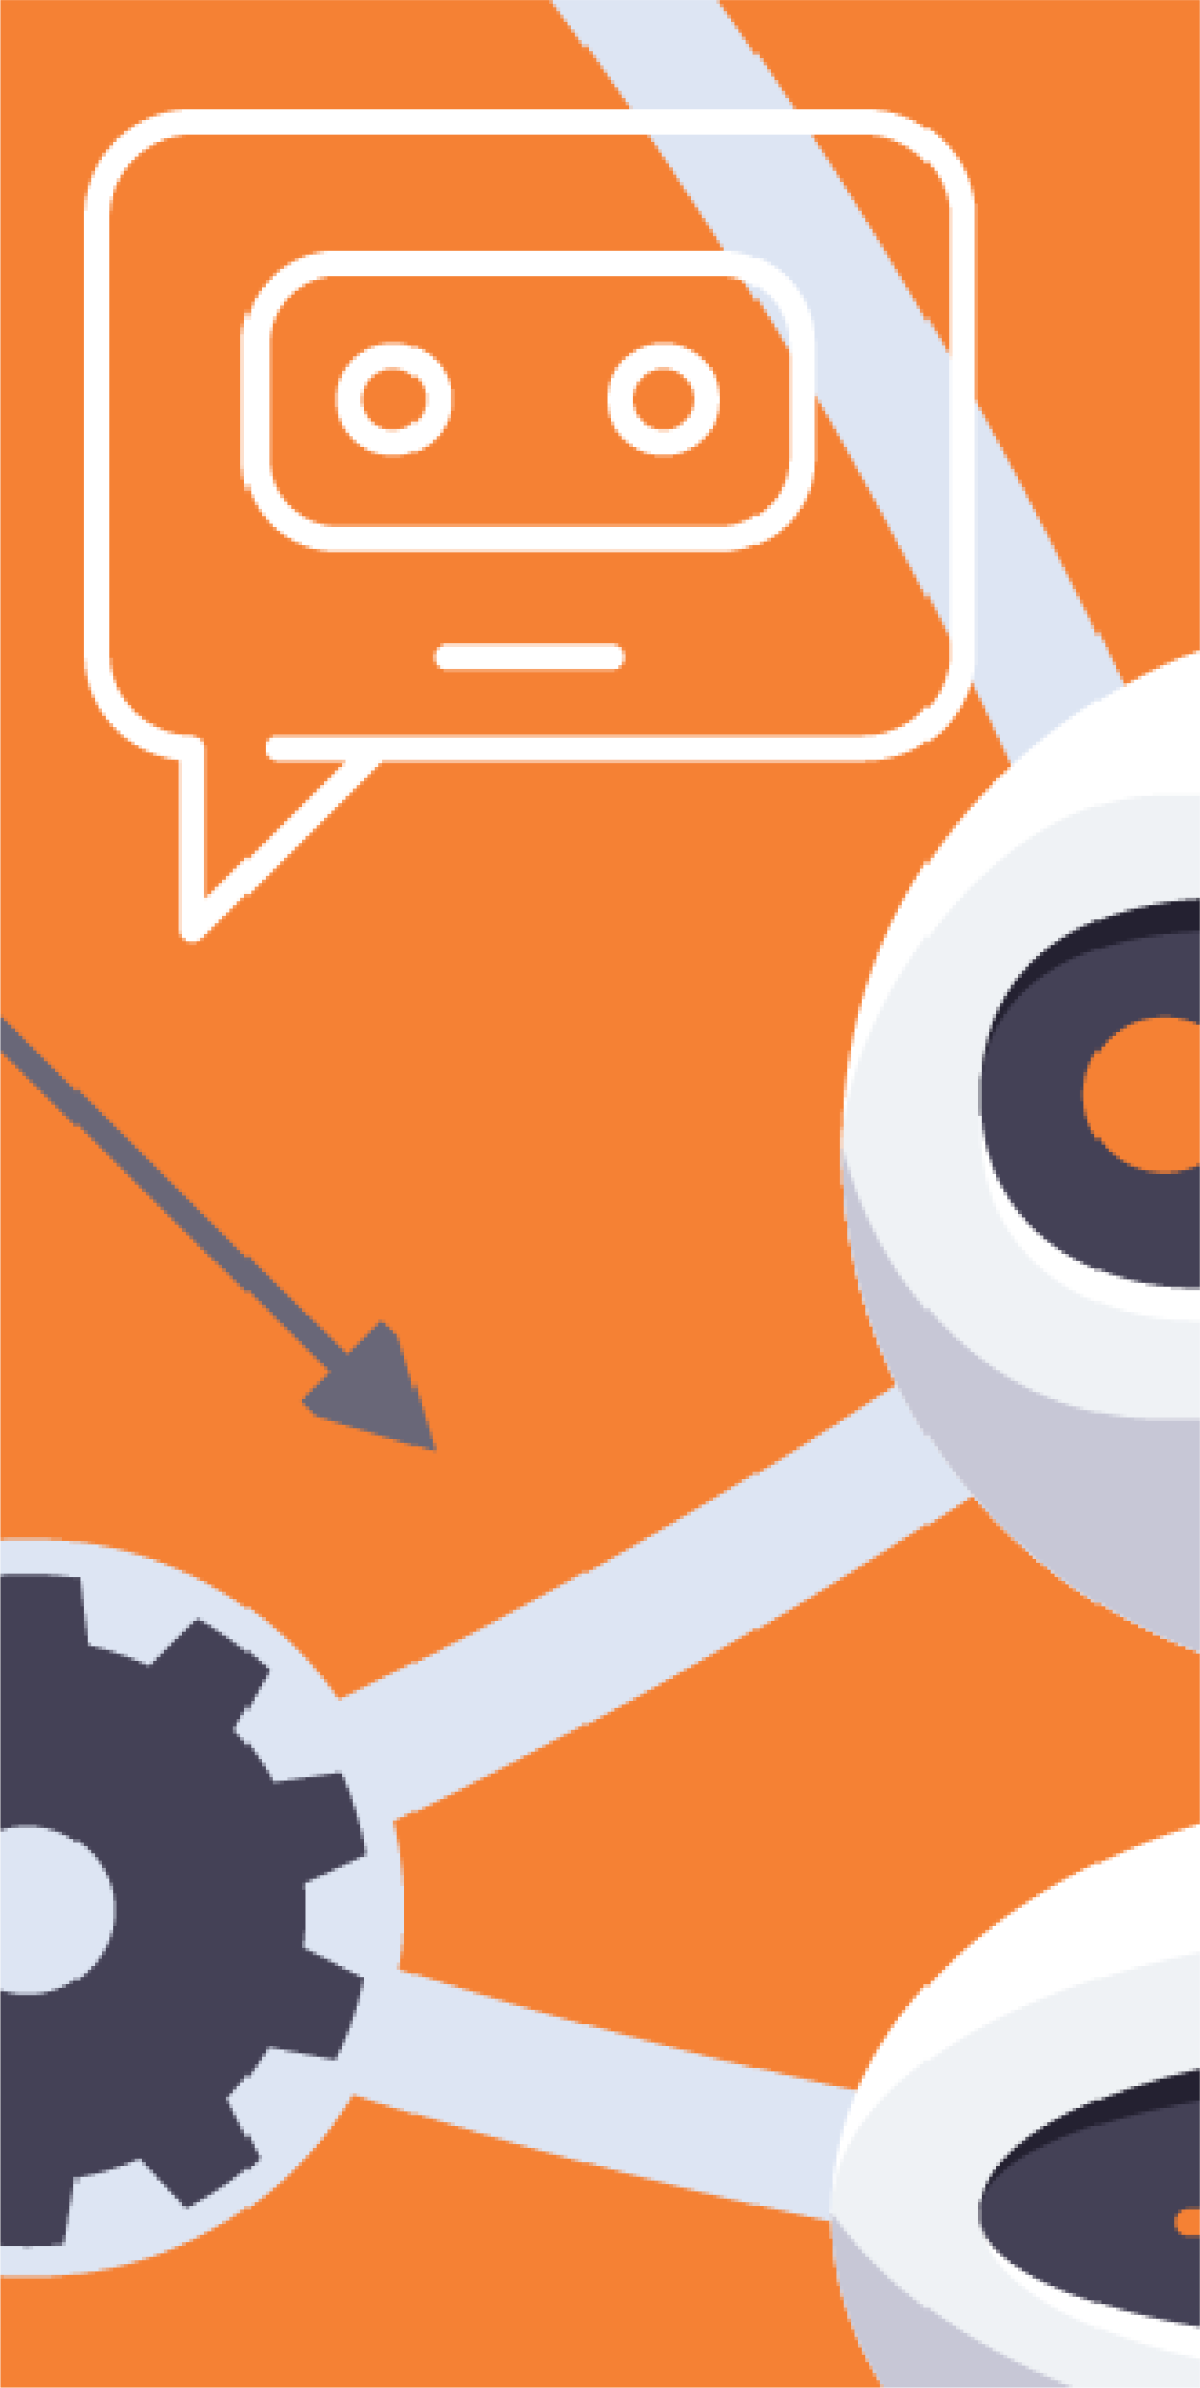 Graphic of a chat bot against an orange background.